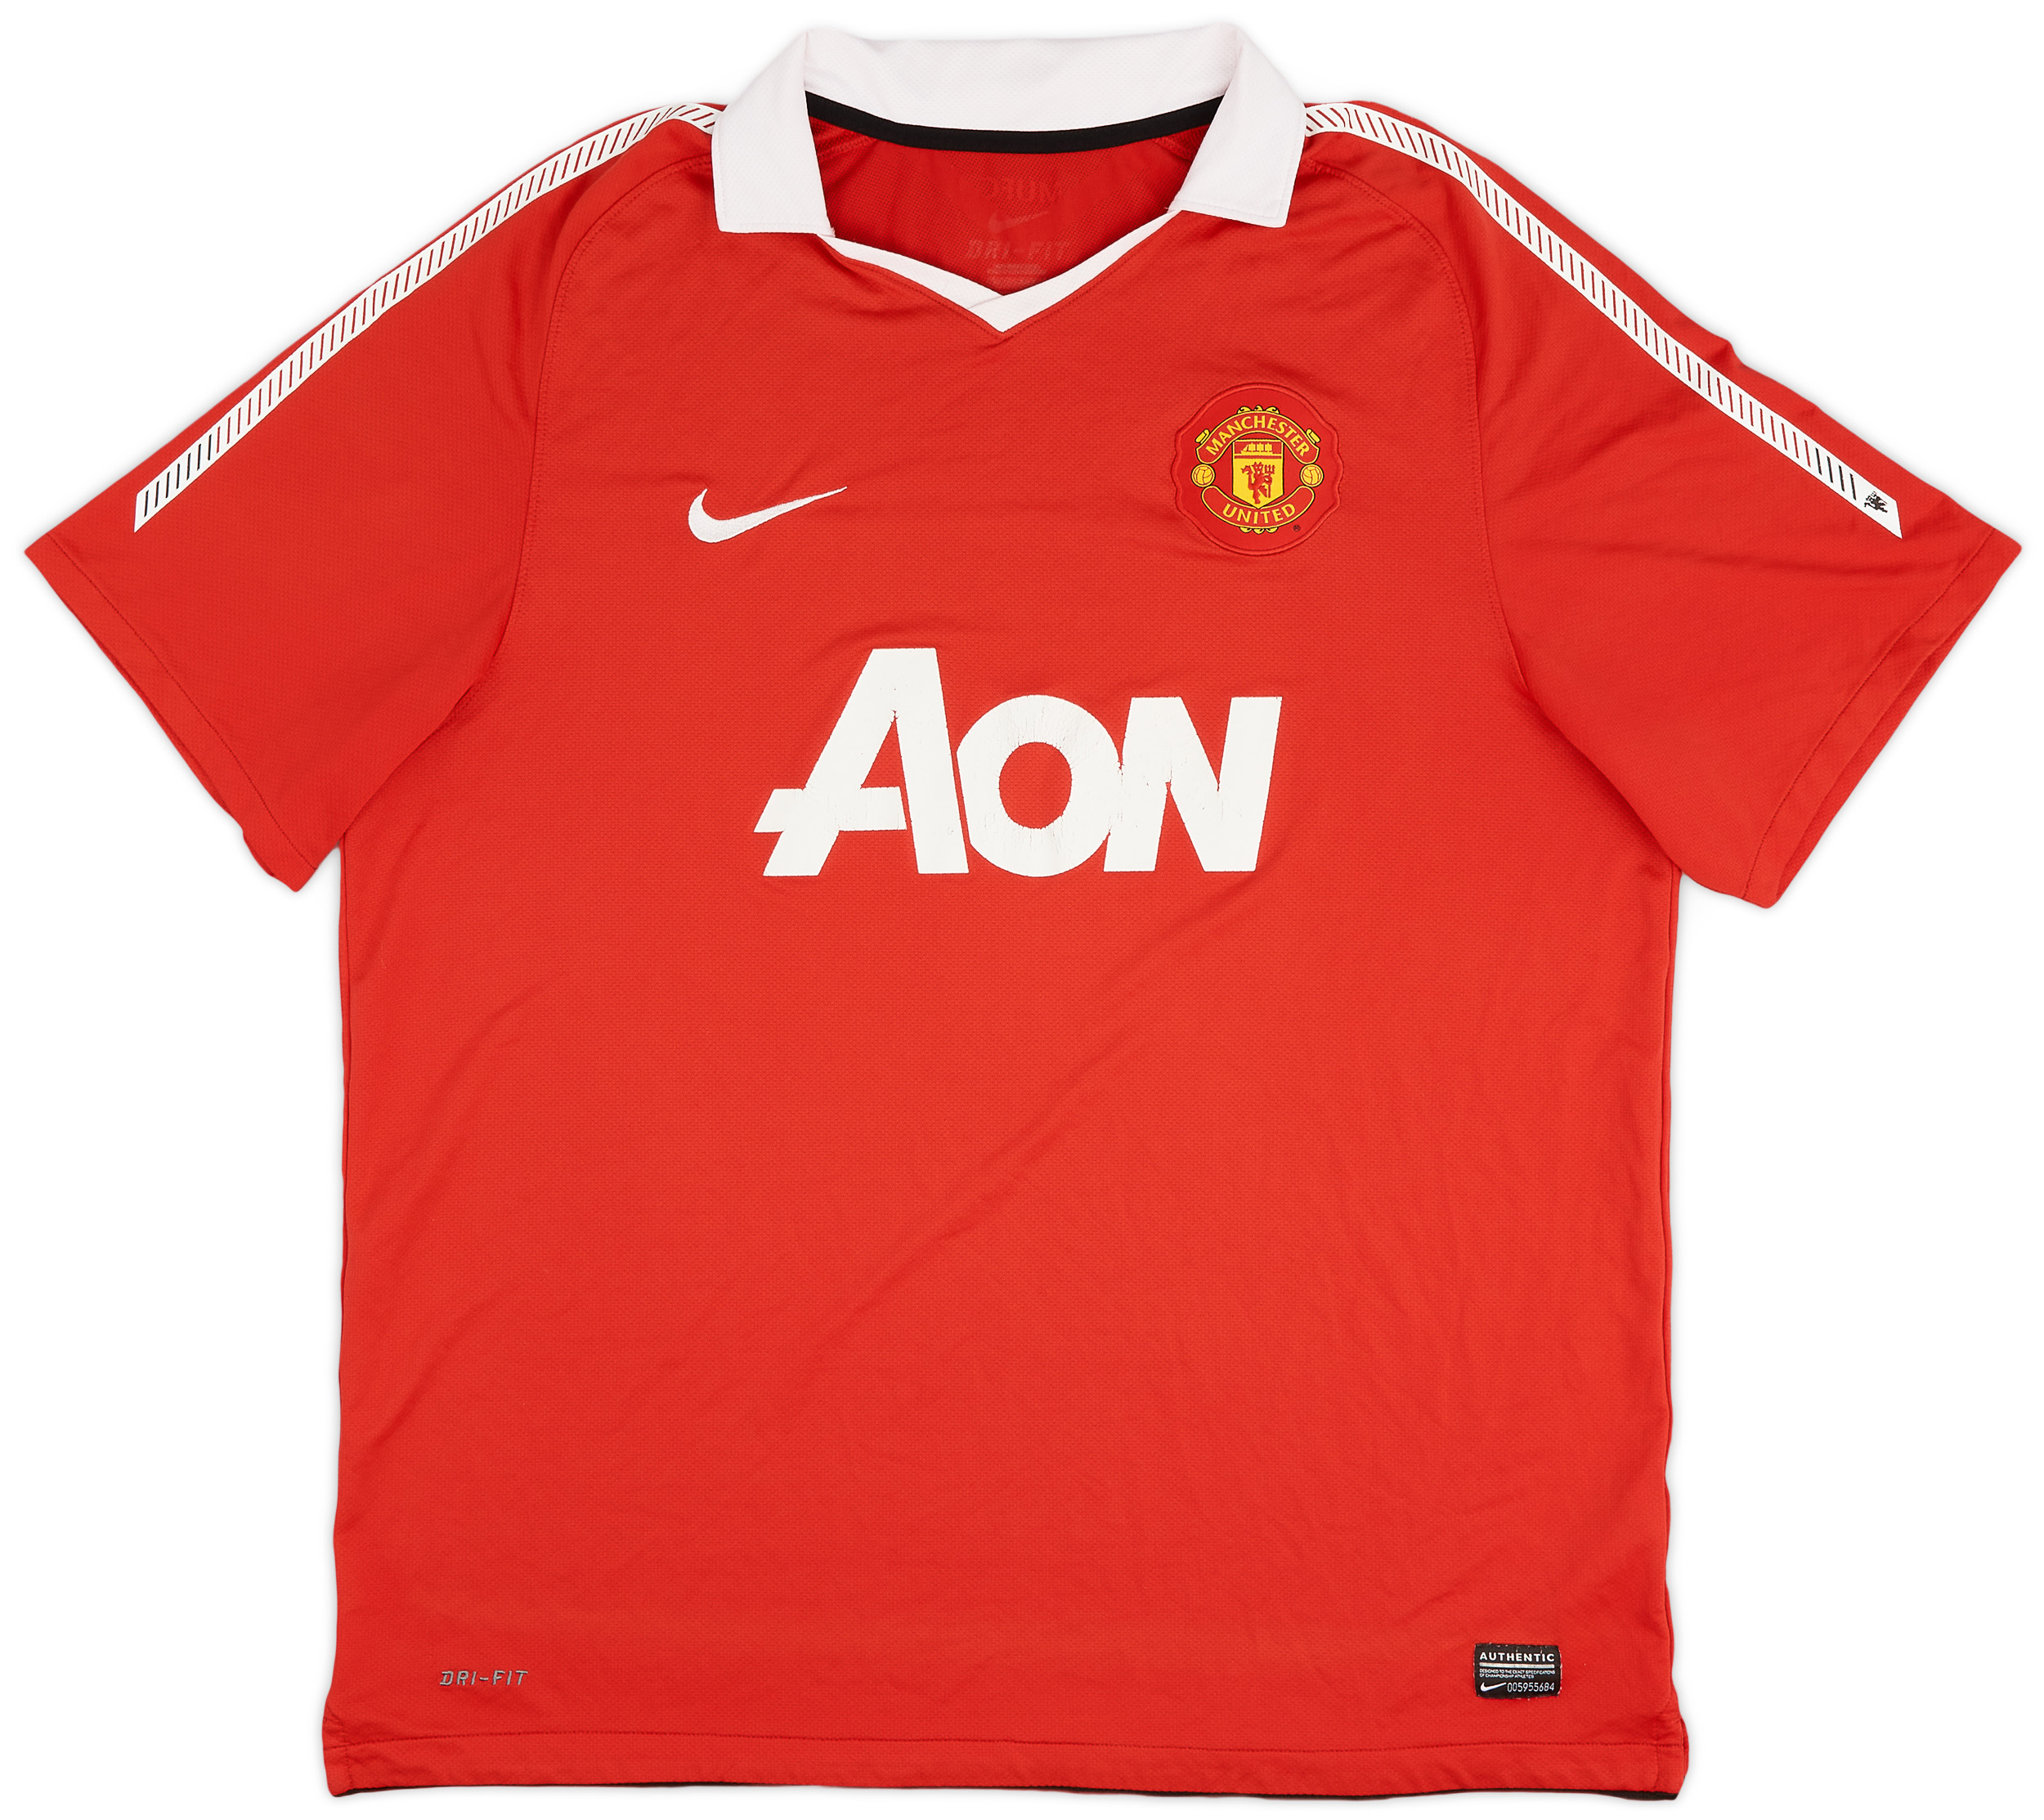 2010-11 Manchester United Home Shirt - 5/10 - ()